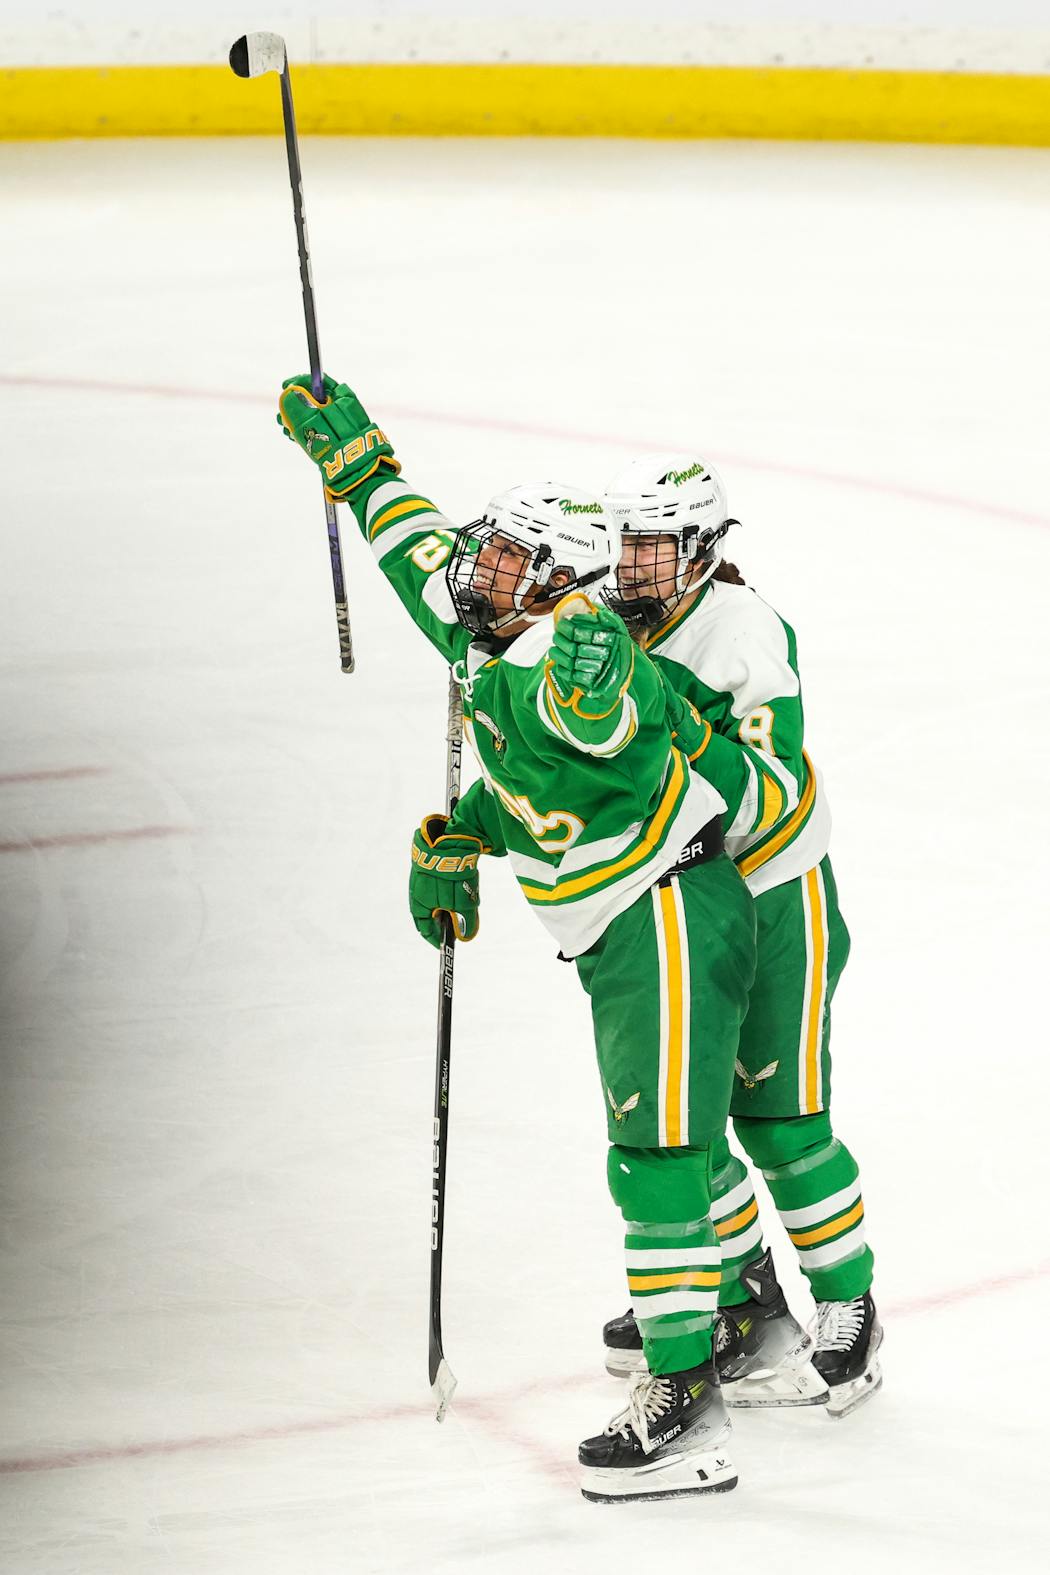 Lorelai Nelson (12) celebrated her third-period goal that gave Edina a two-goal lead Saturday.